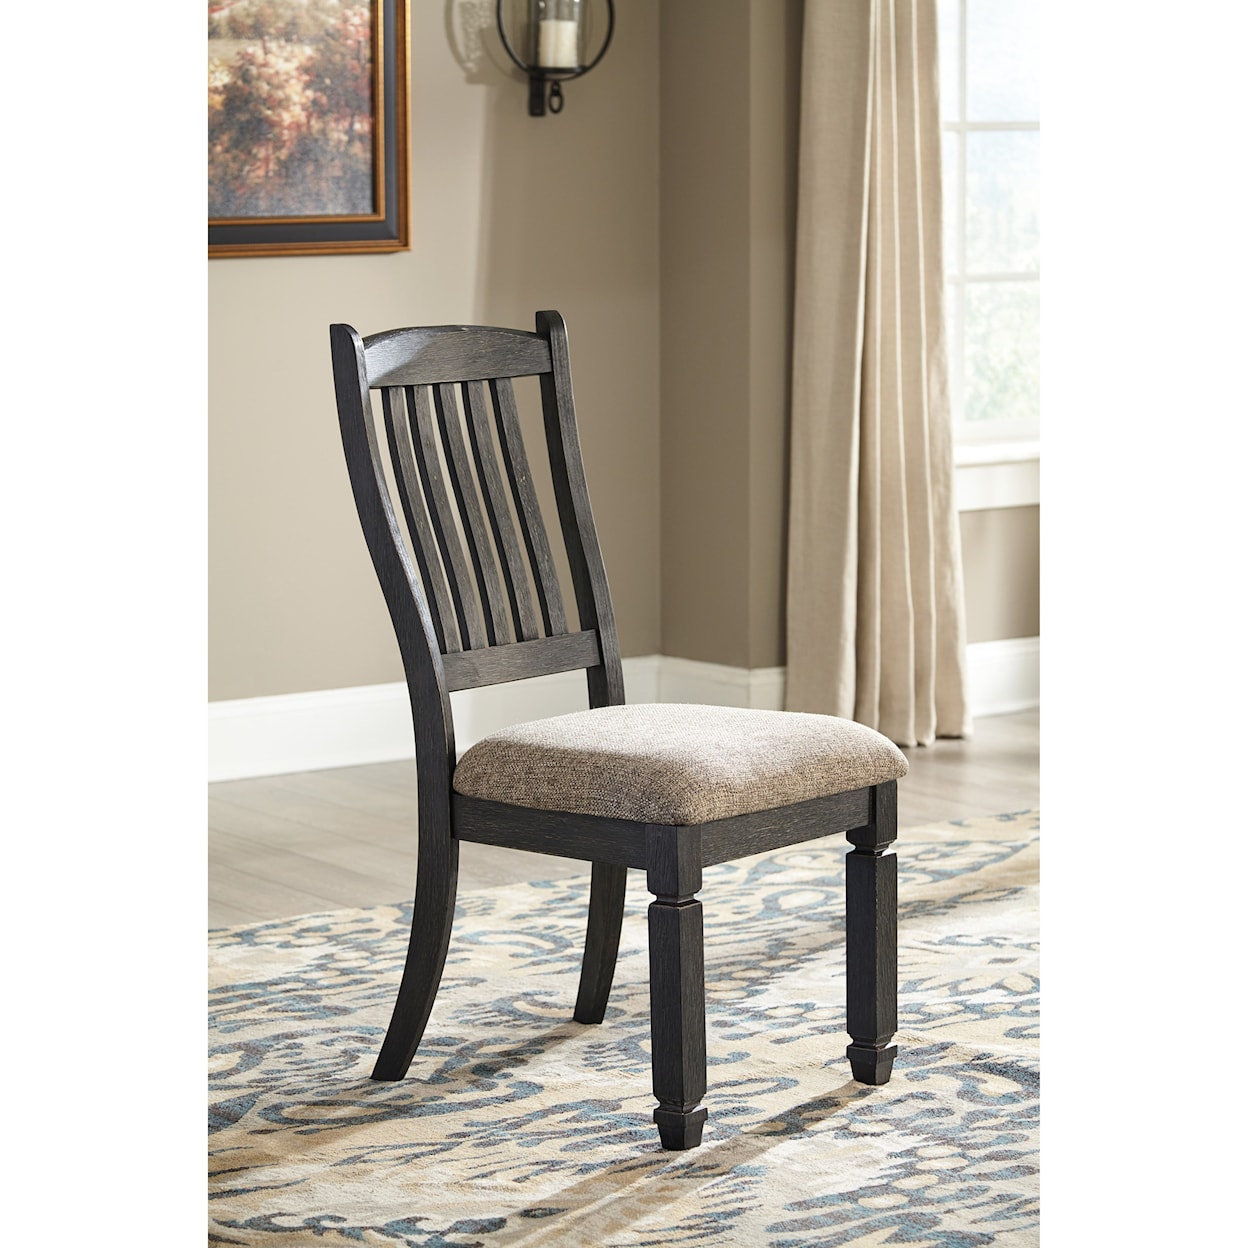 Signature Design Tyler Creek 6-Piece Table and Chair Set